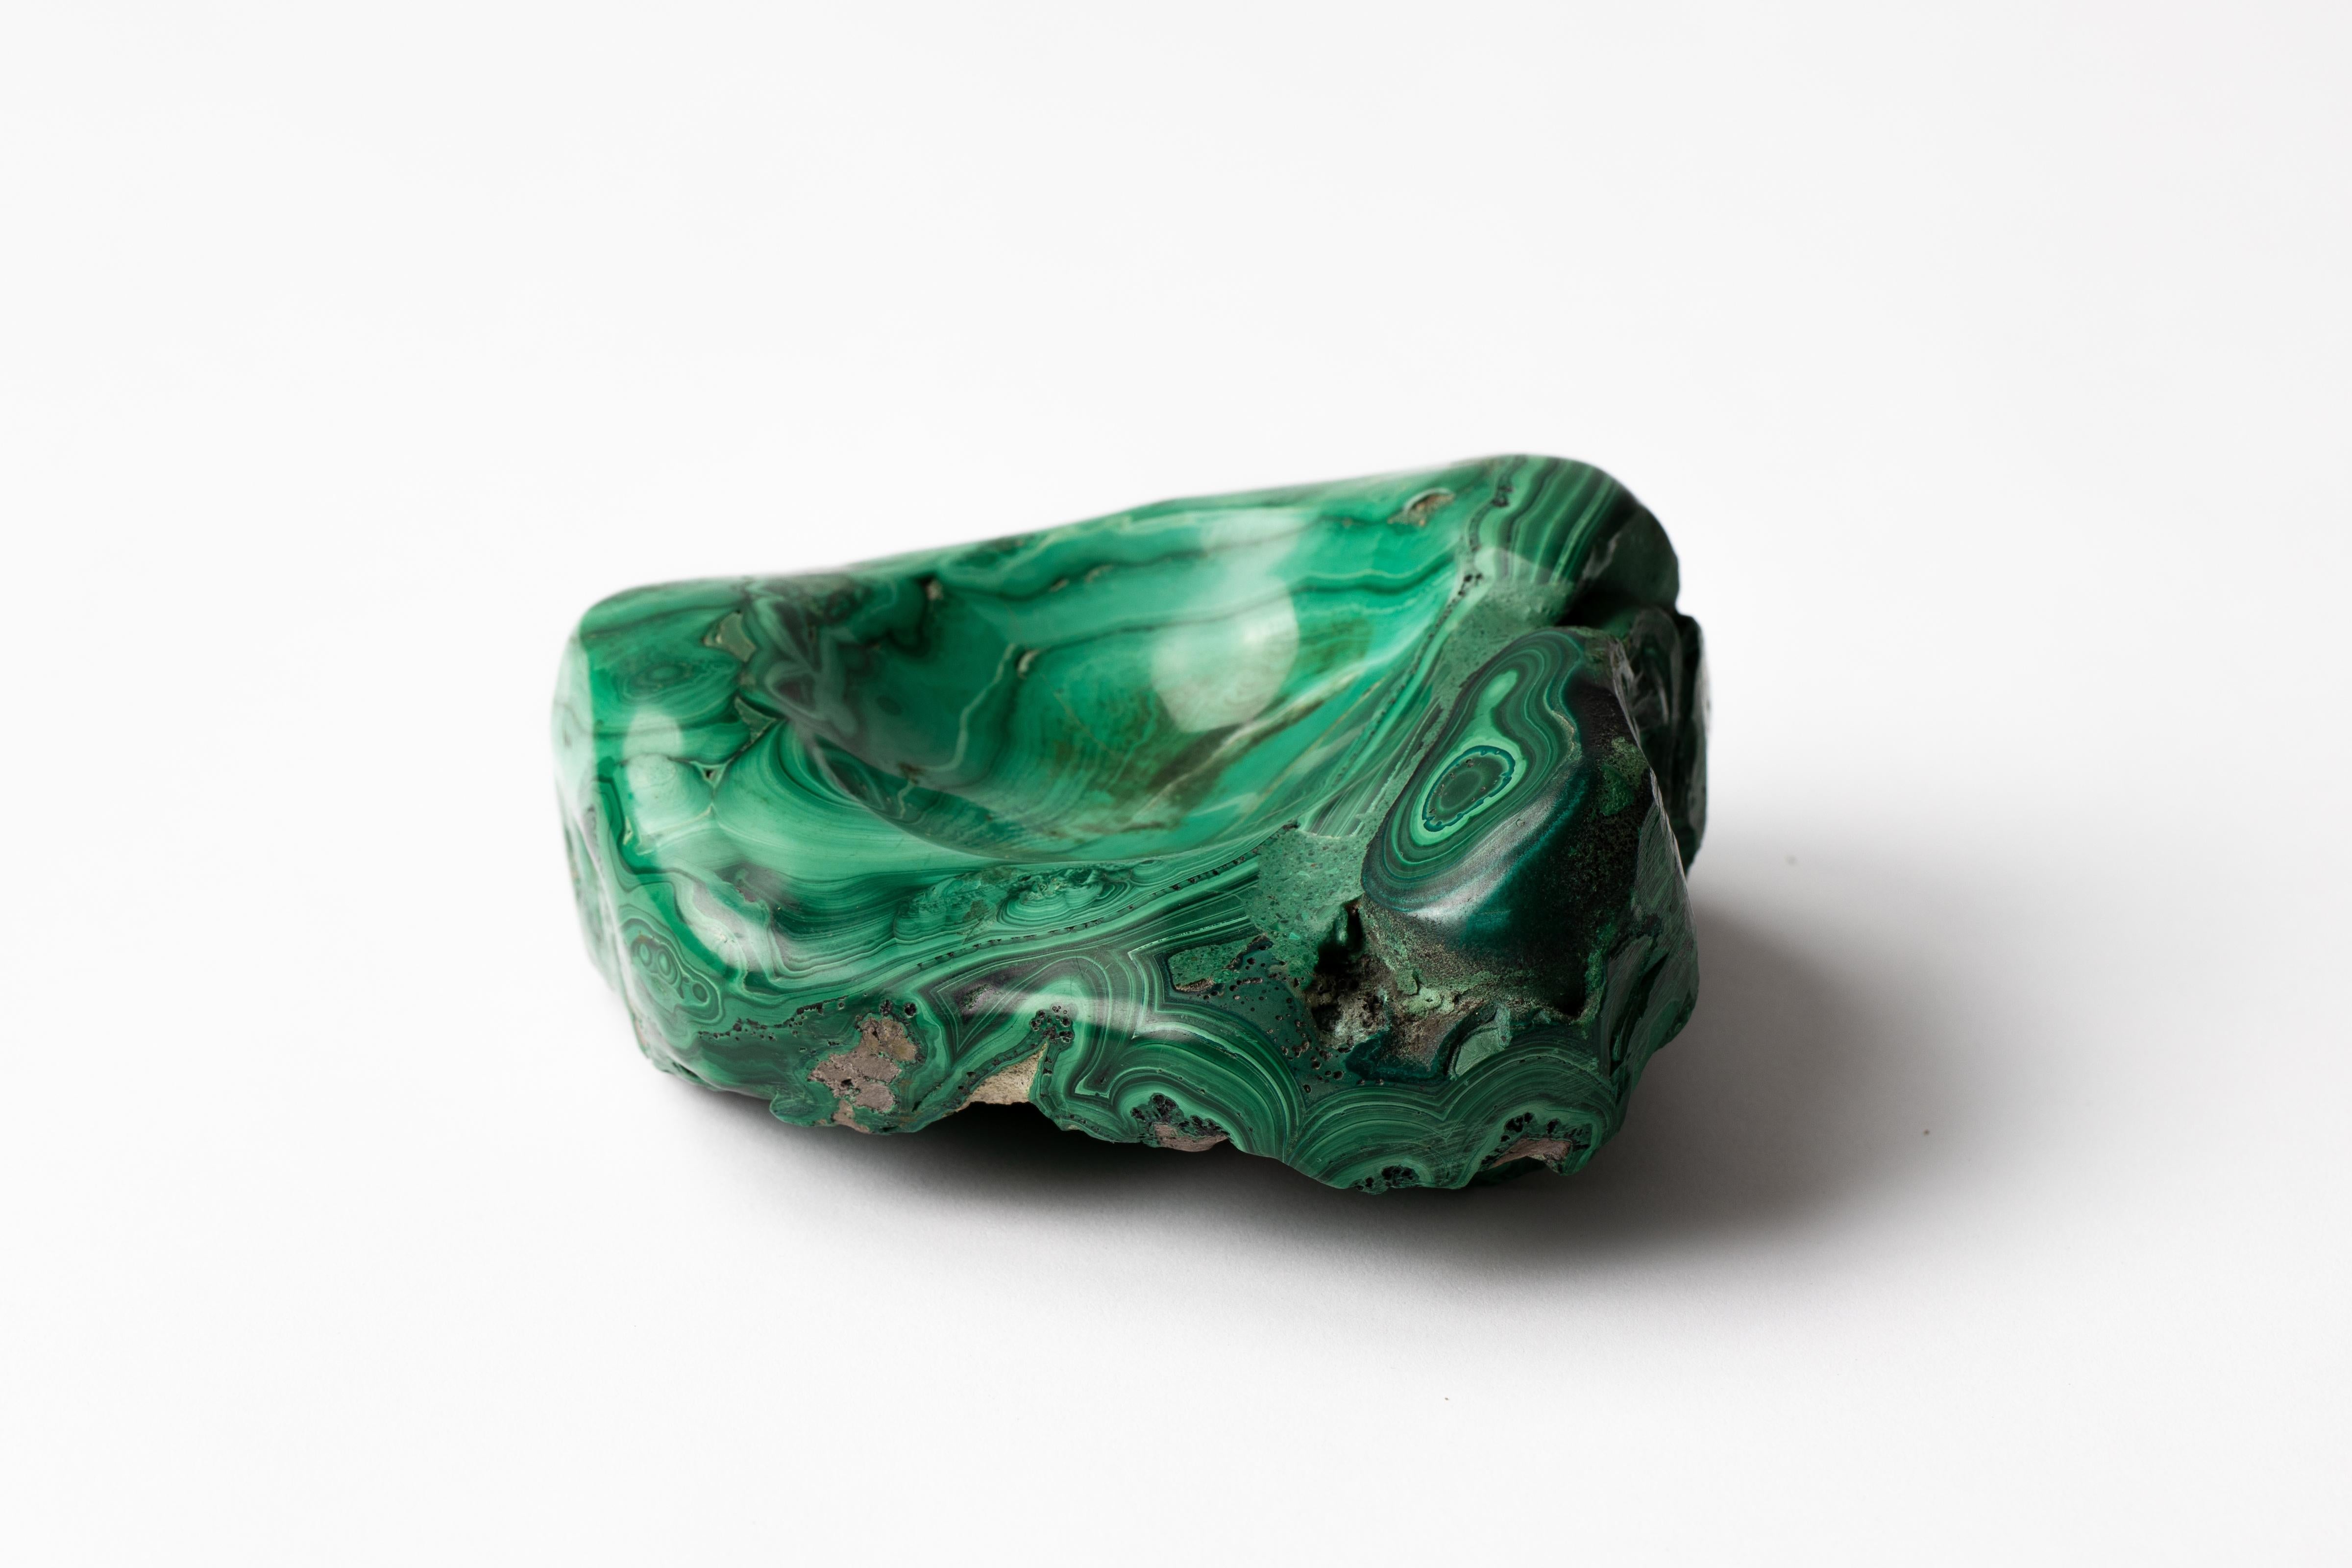 Natural malachite stone specimen vide poche tray hand carved at center.
May be used as a decorative object or used as a paperweight to brighten ones desk.
Beautiful includes crystal forms on bottom, as pictured.